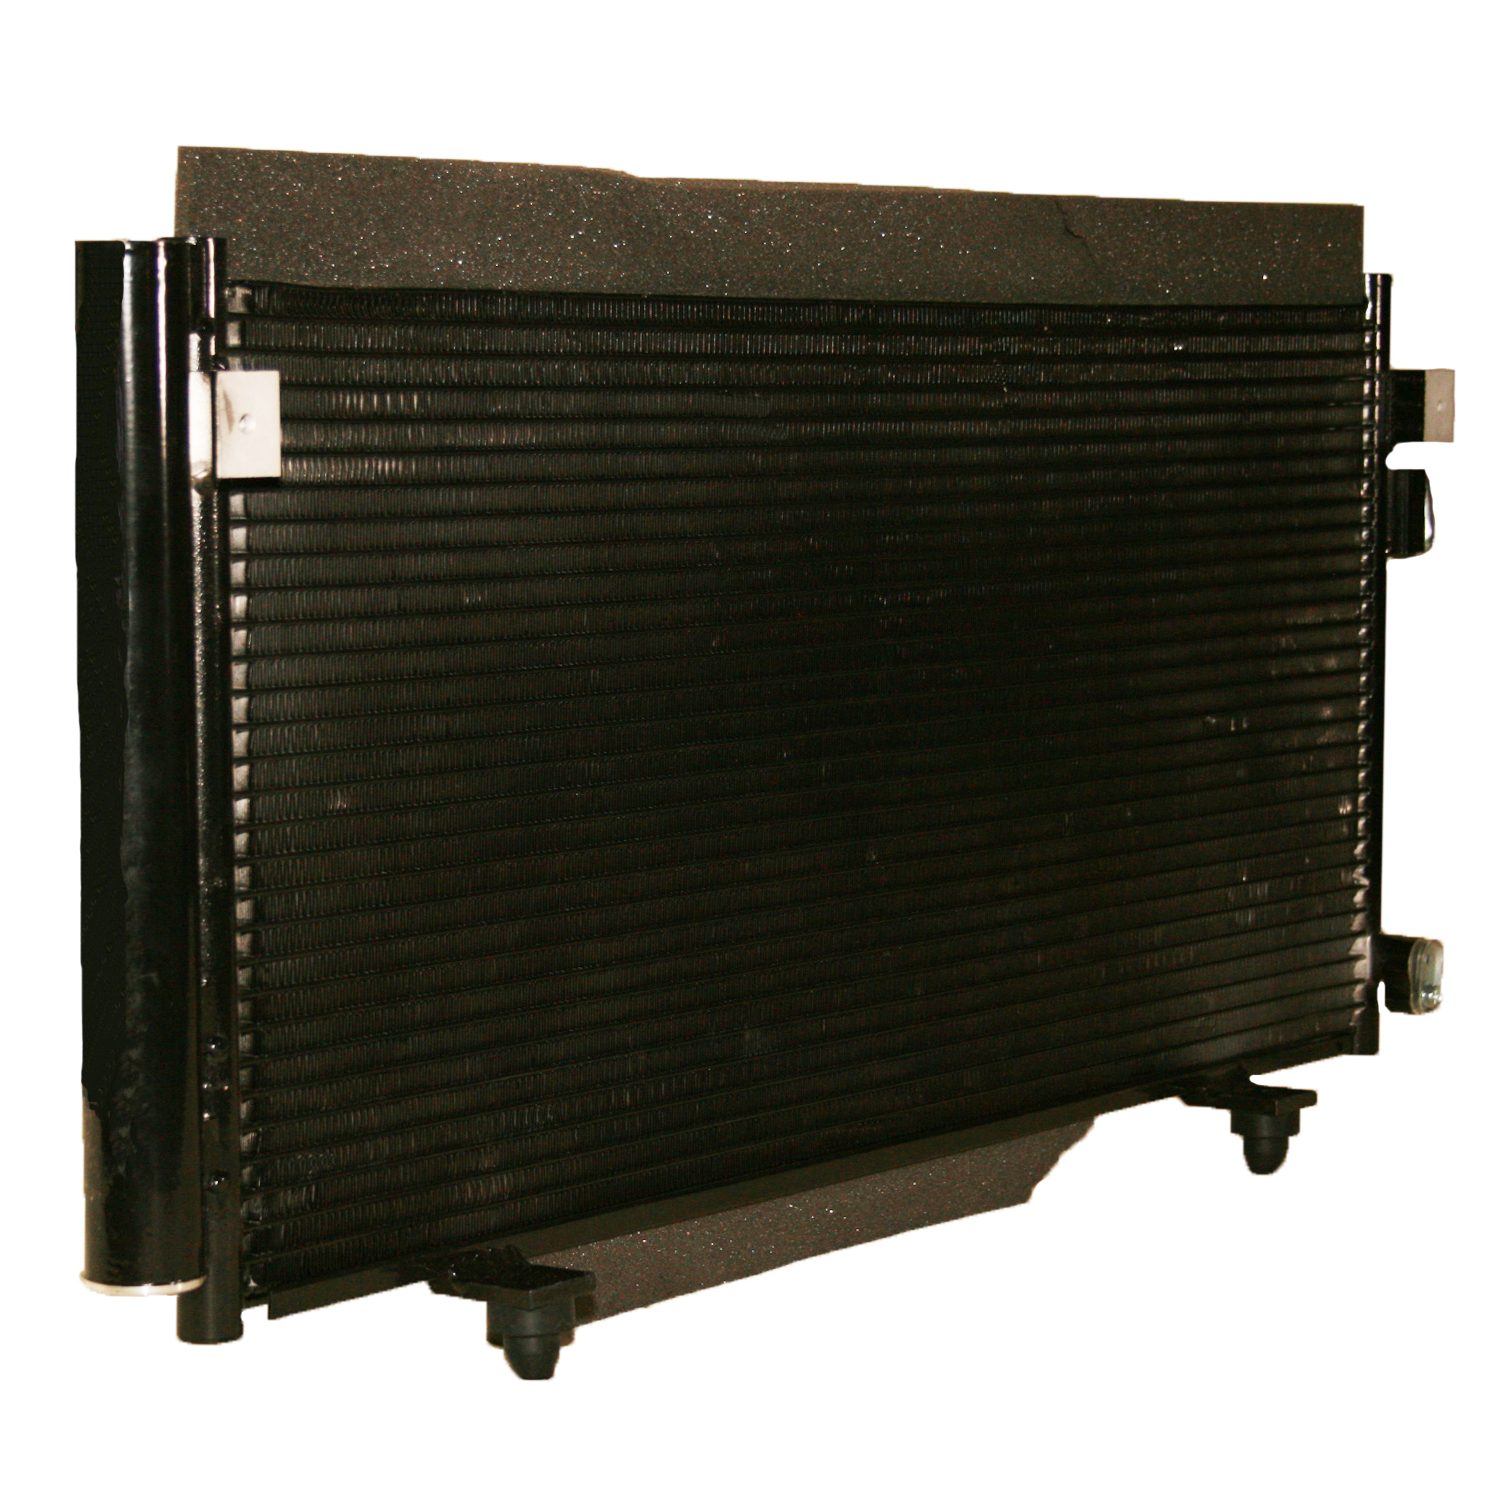 TCW Condenser 44-3689 New Product Image field_60b6a13a6e67c